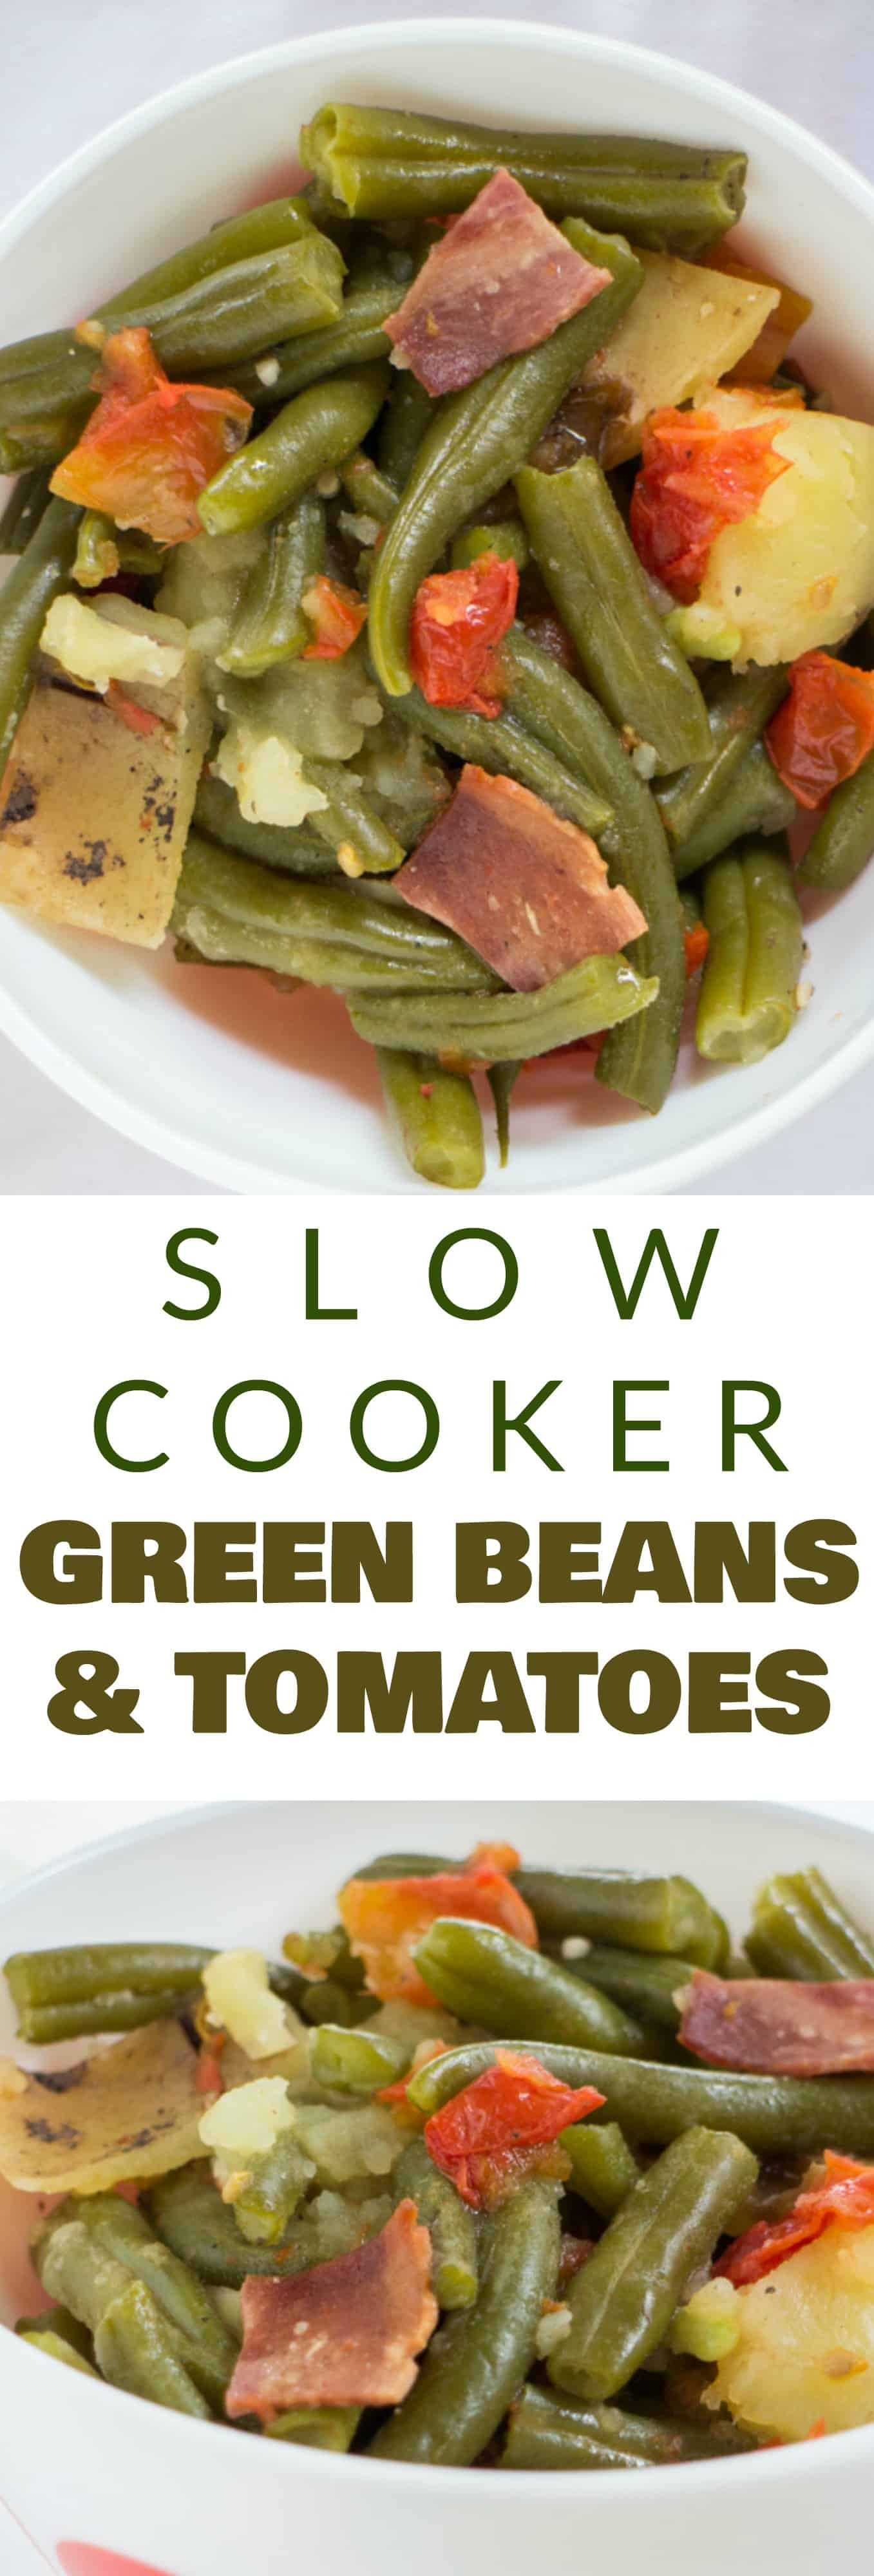 Greens Beans Potatoes Tomatoes
 Slow Cooker Green Beans and Tomatoes Brooklyn Farm Girl